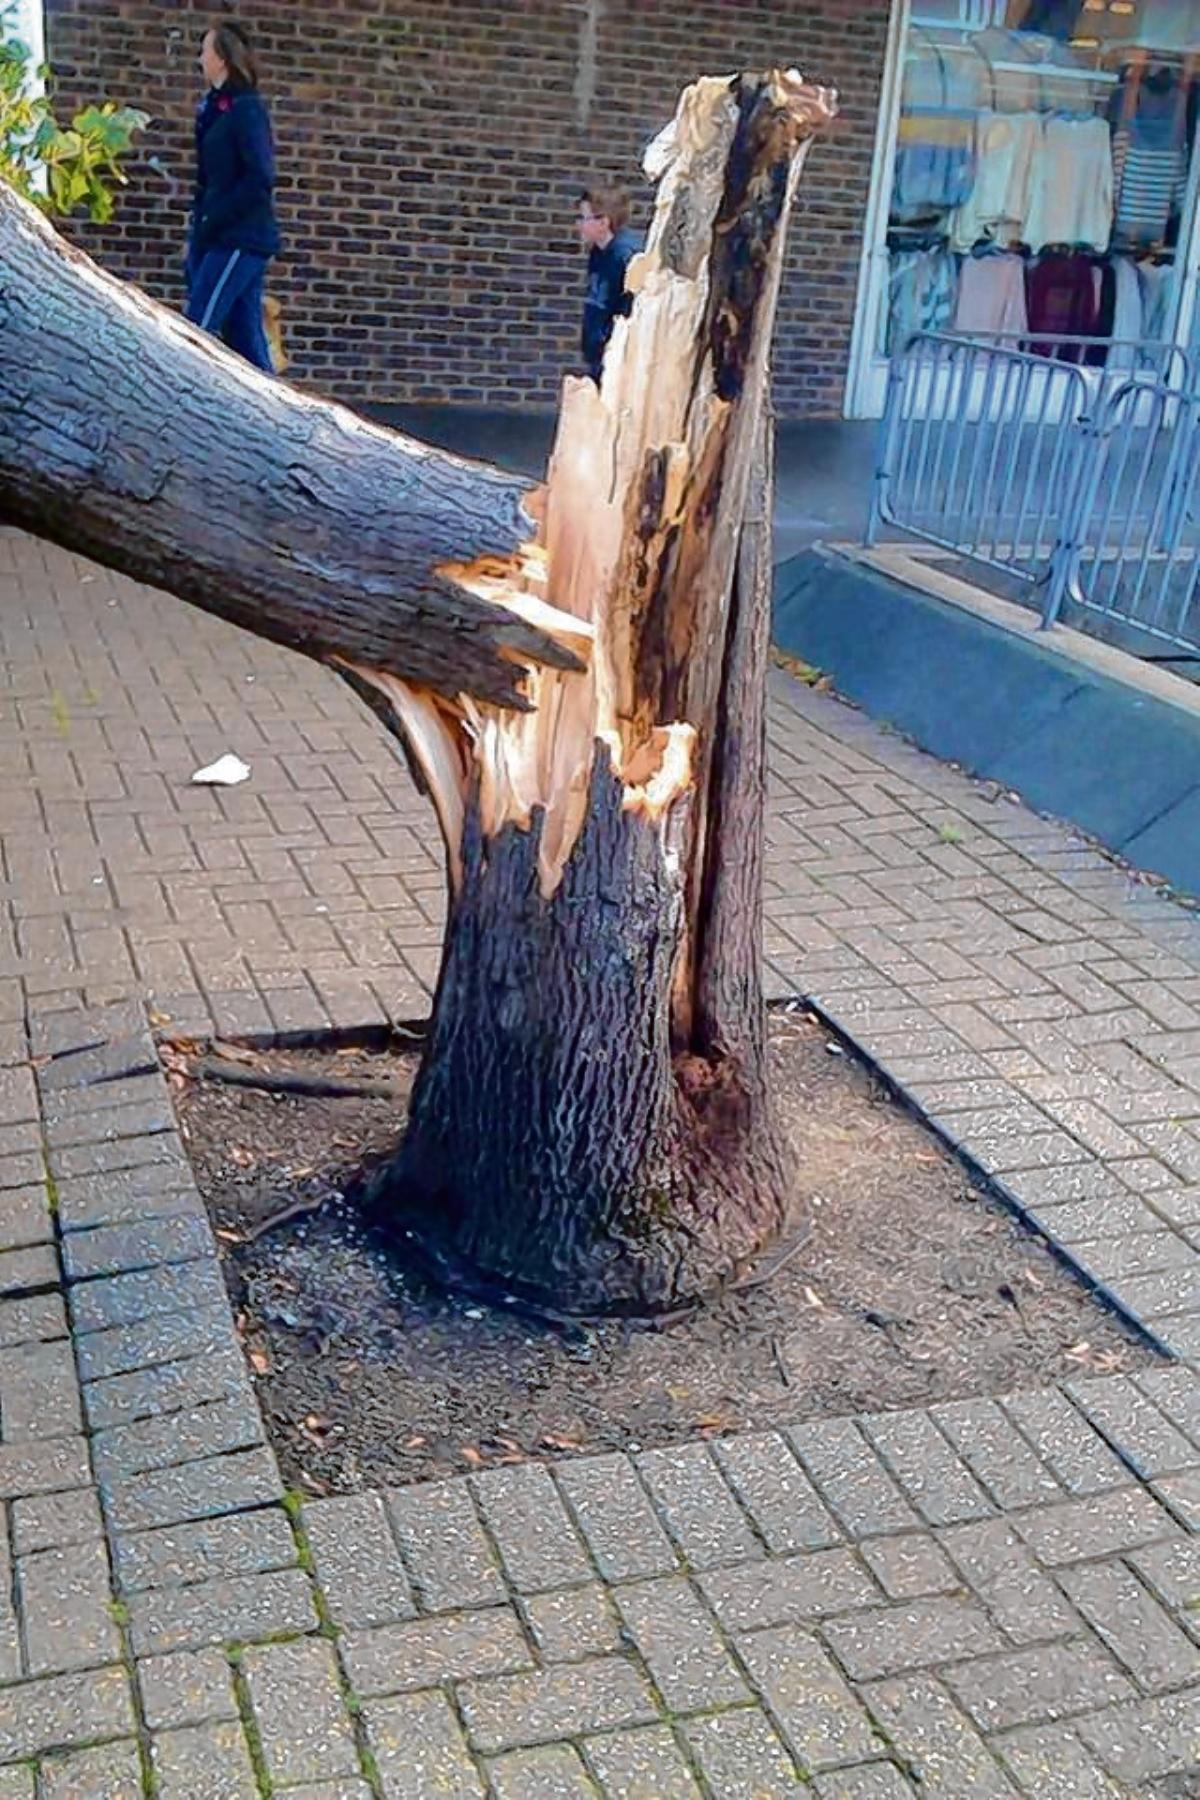 A tree in the Newlands Precinct, Witham. Photo taken by Kevin Slattery.